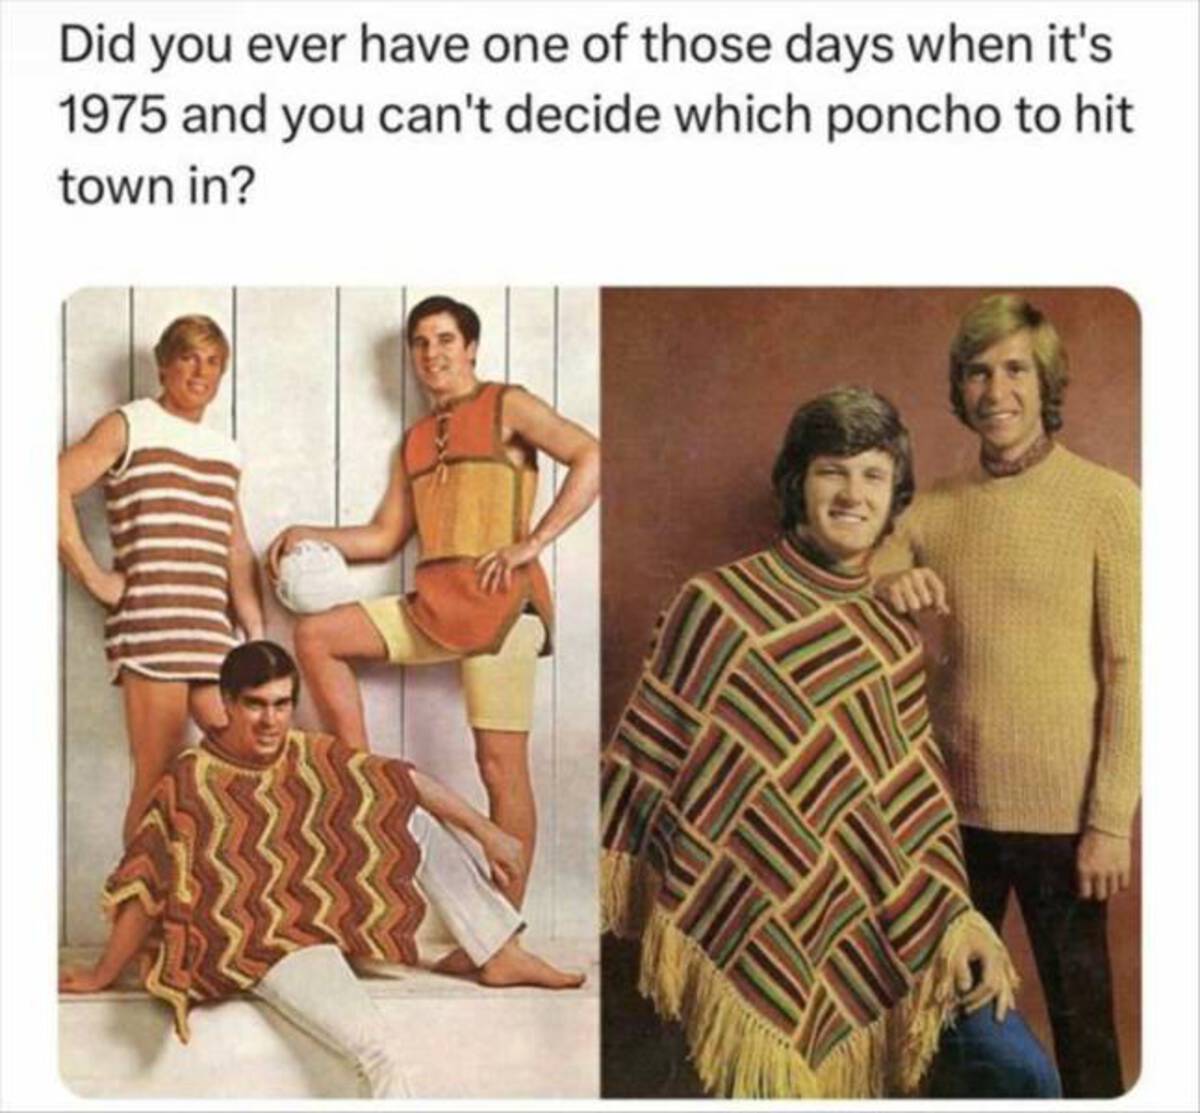 shoulder - Did you ever have one of those days when it's 1975 and you can't decide which poncho to hit town in?